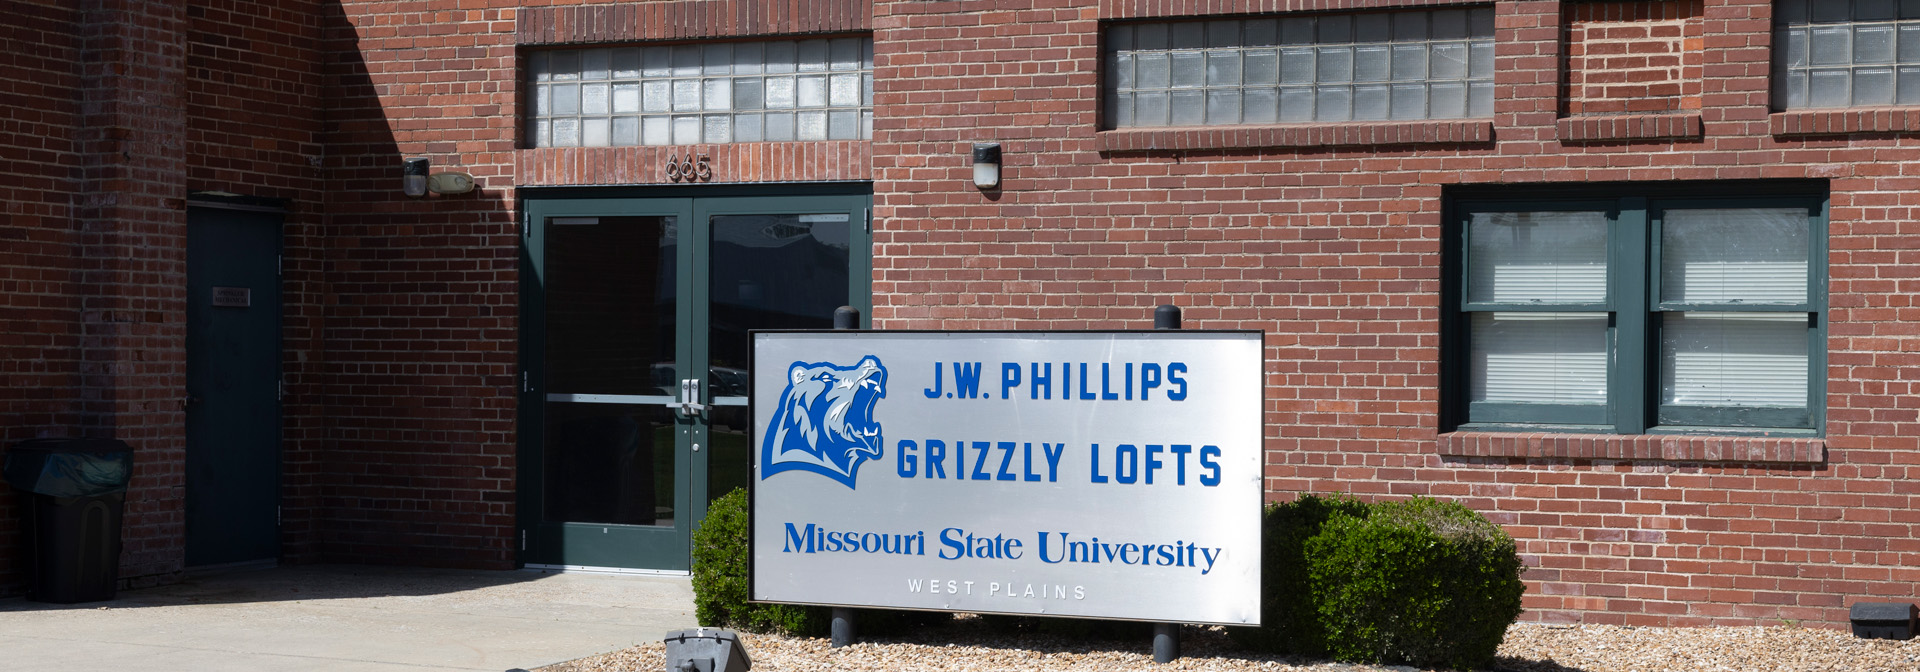 Grizzly Lofts Building